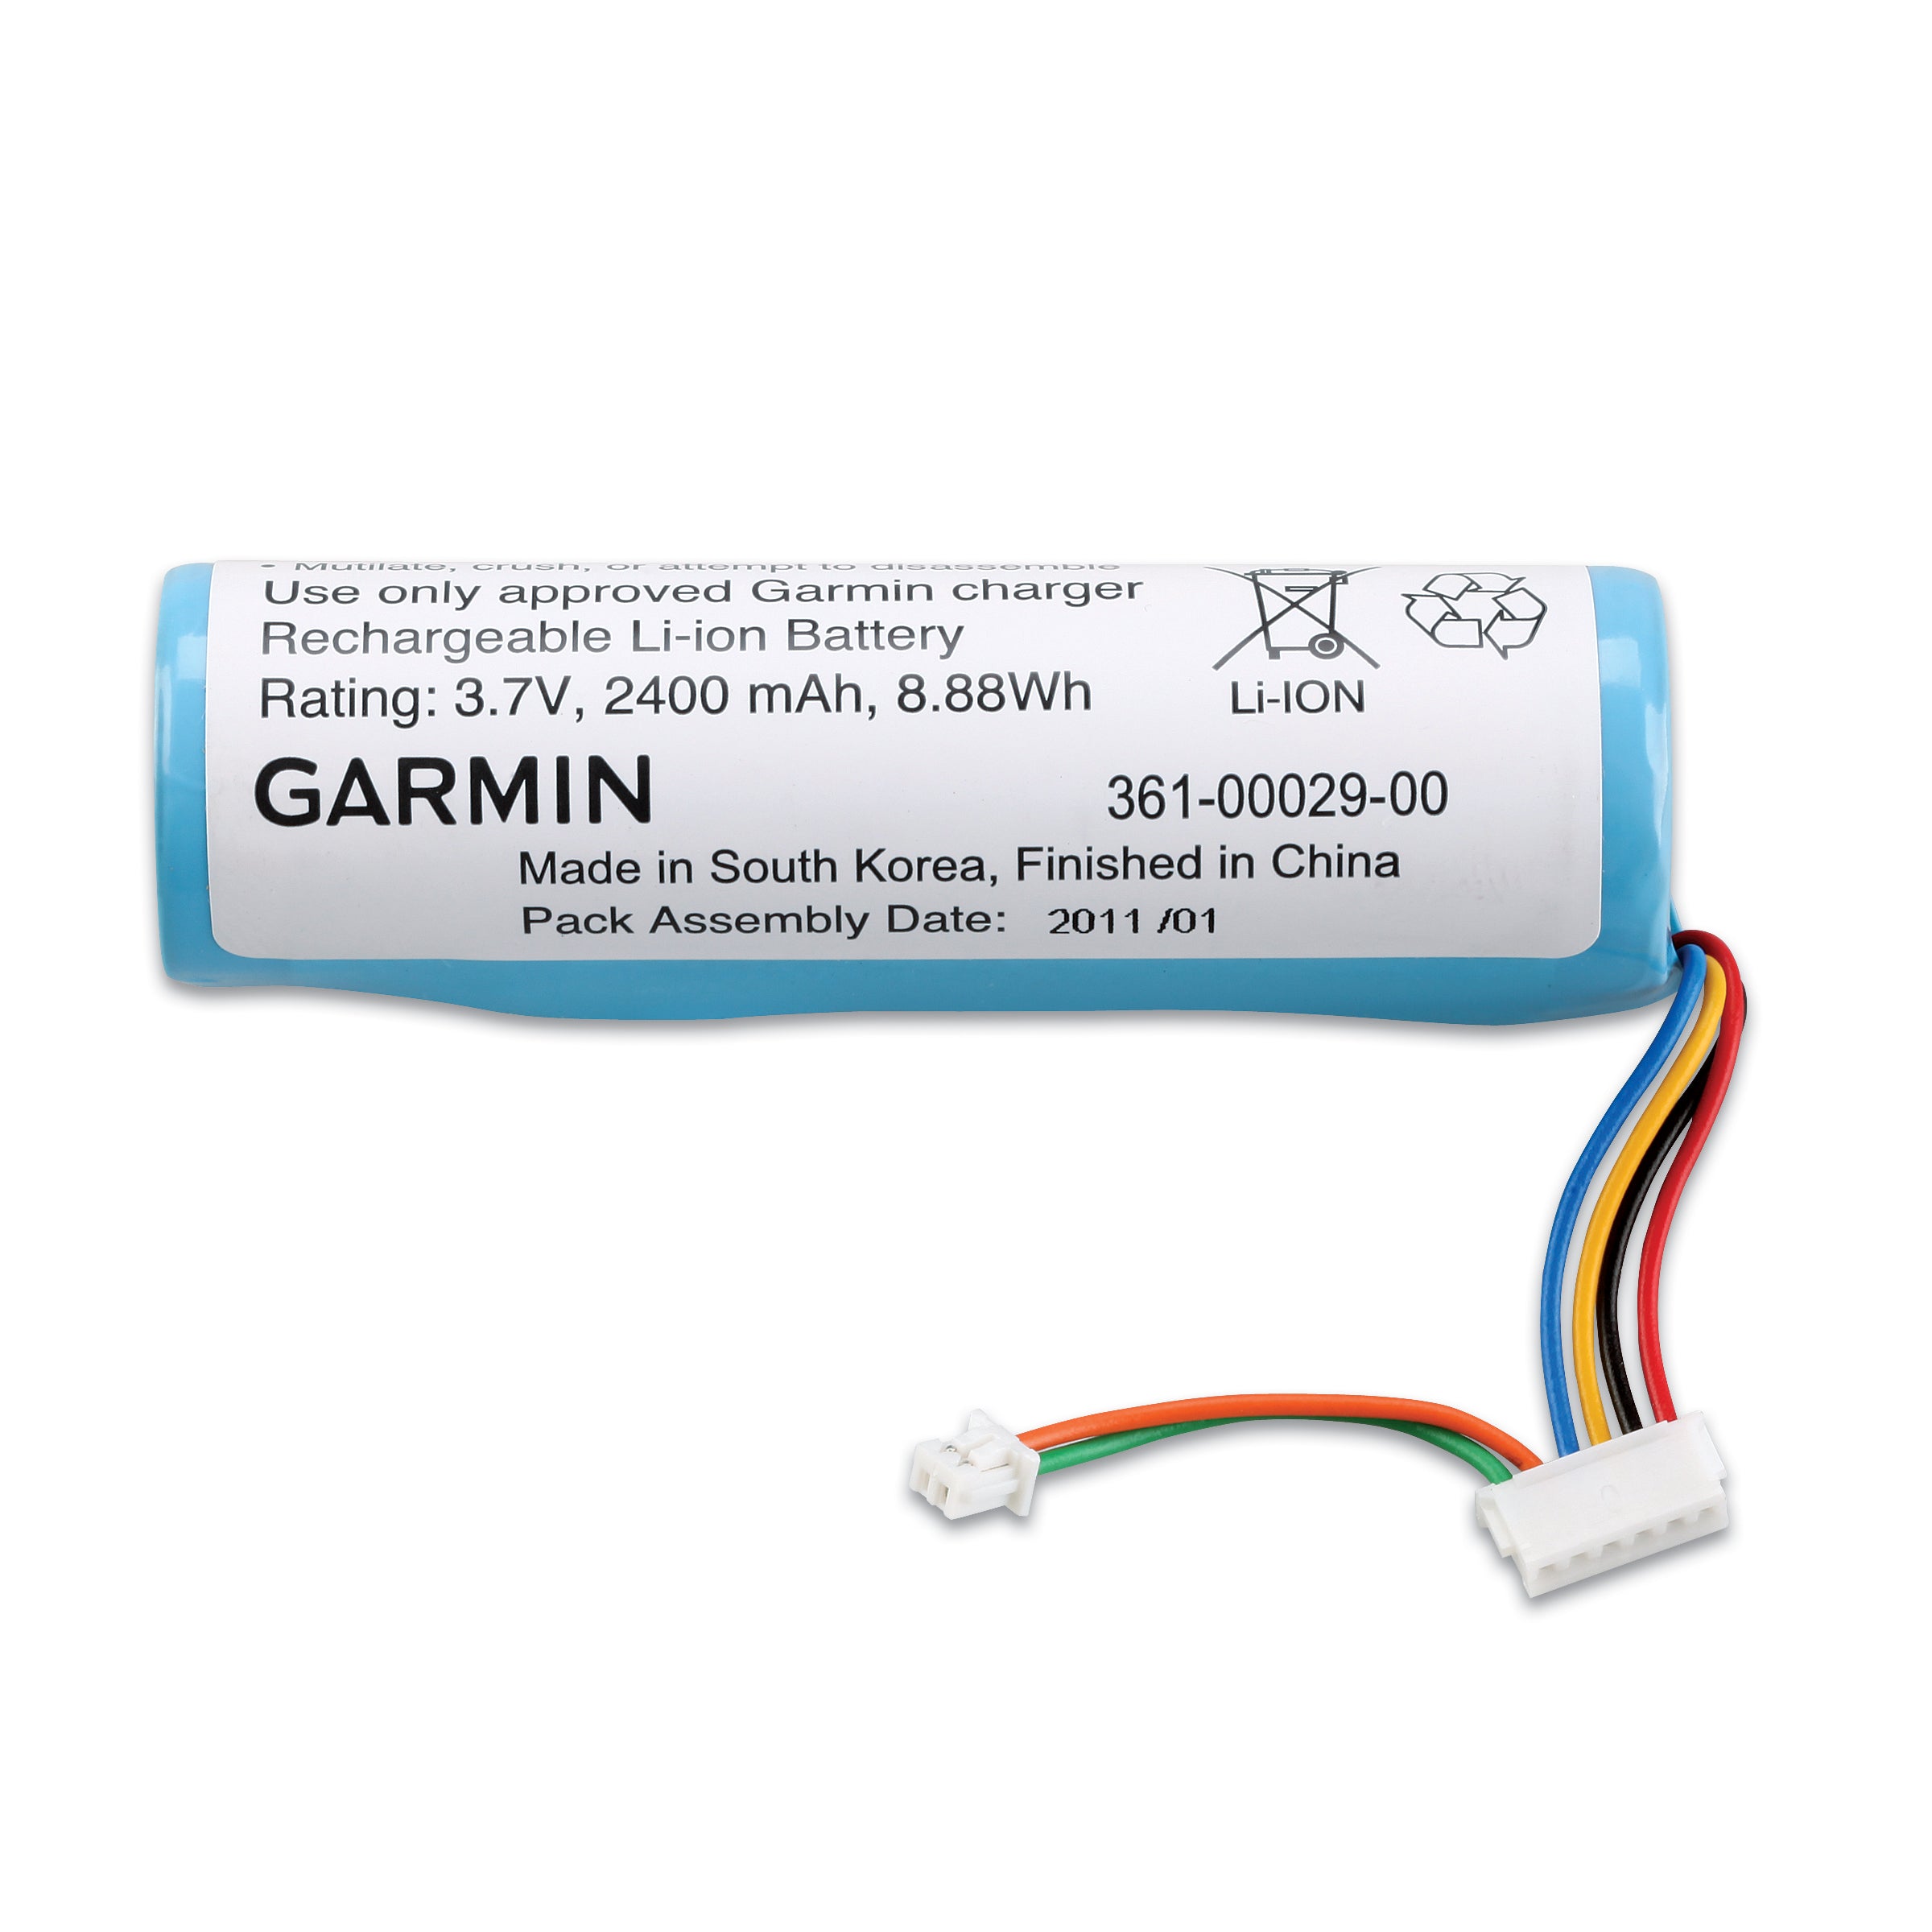 Garmin Replacement lithium-ion battery pack (DC 30)